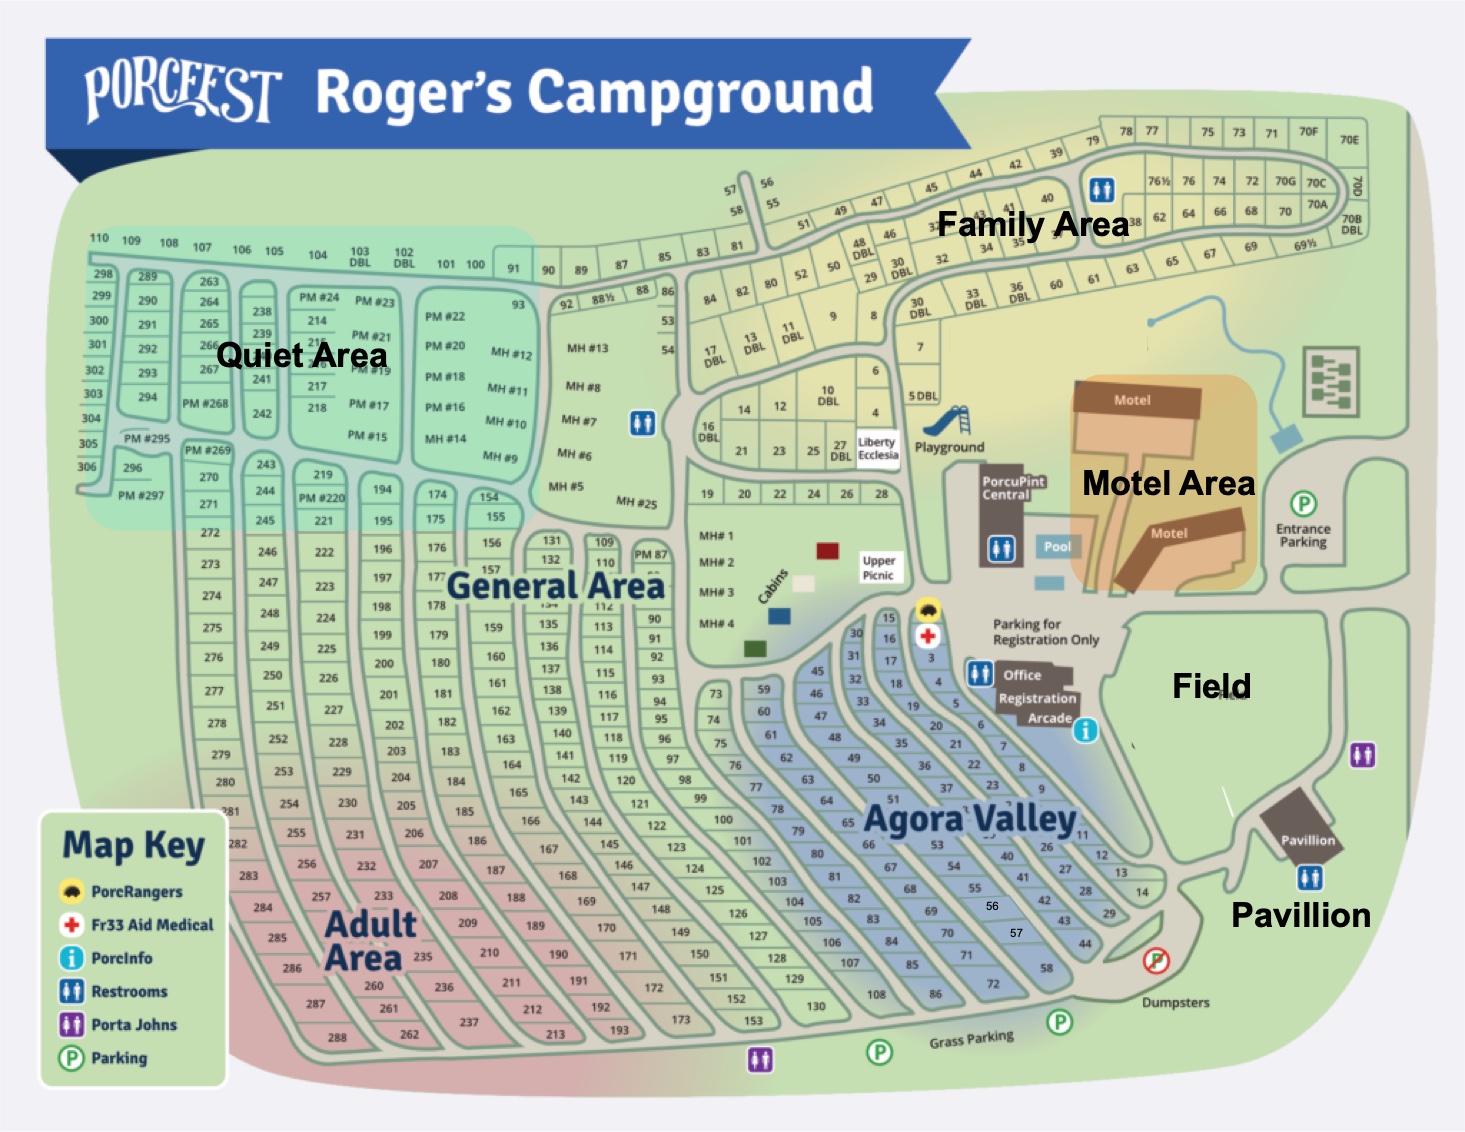 PorcFest campground map 2019